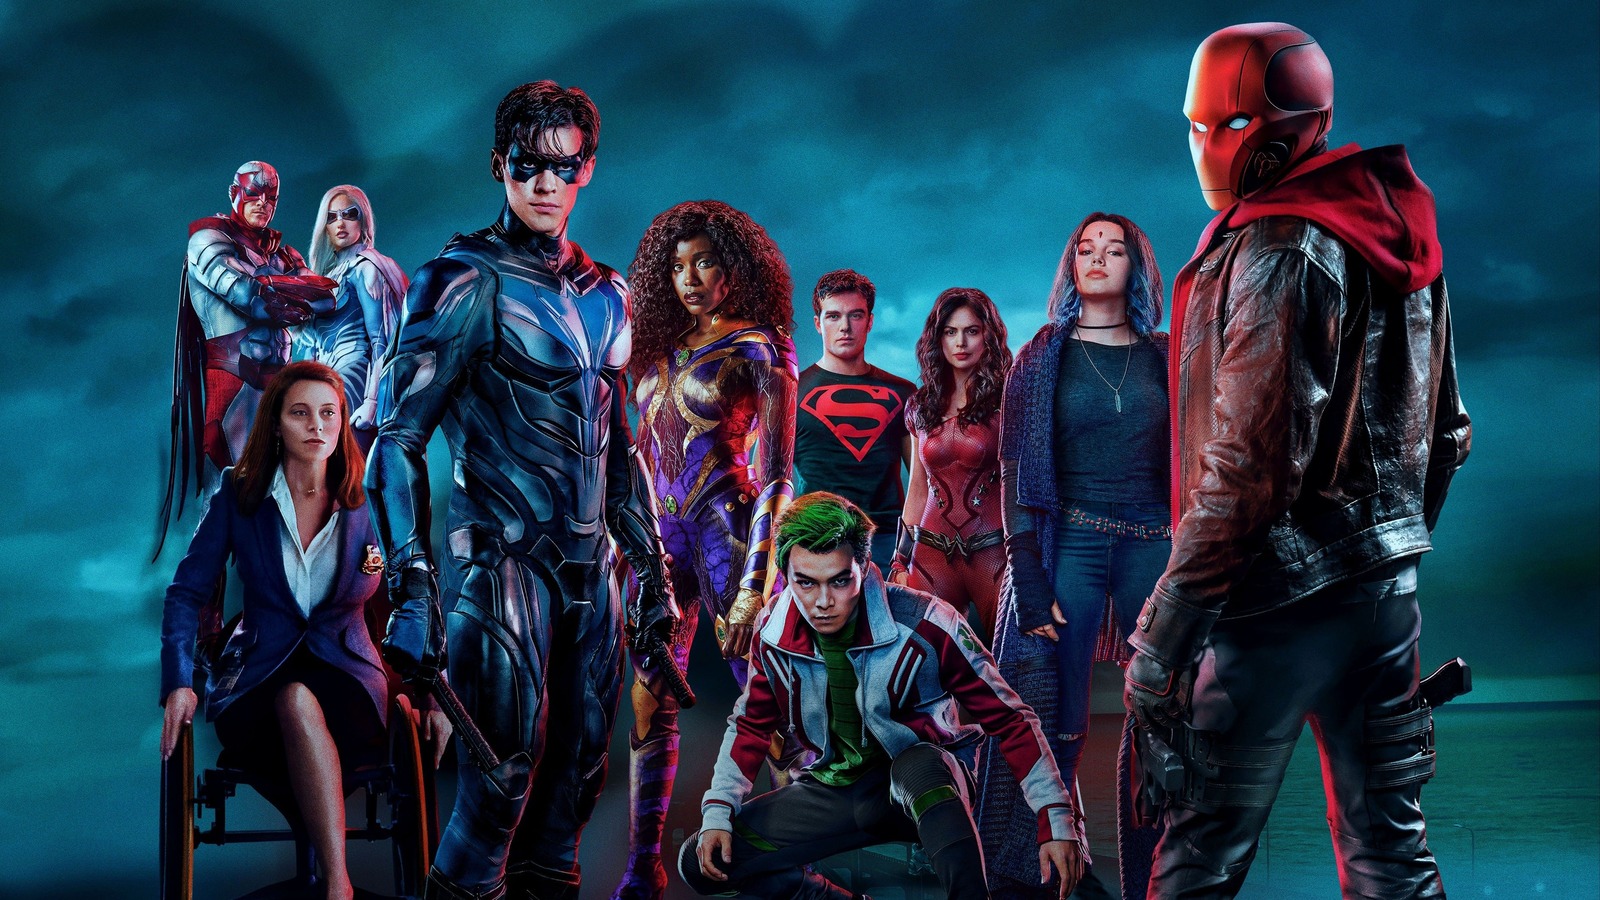 Titans Season 4 Release Date, Cast, And More For The Returning DC